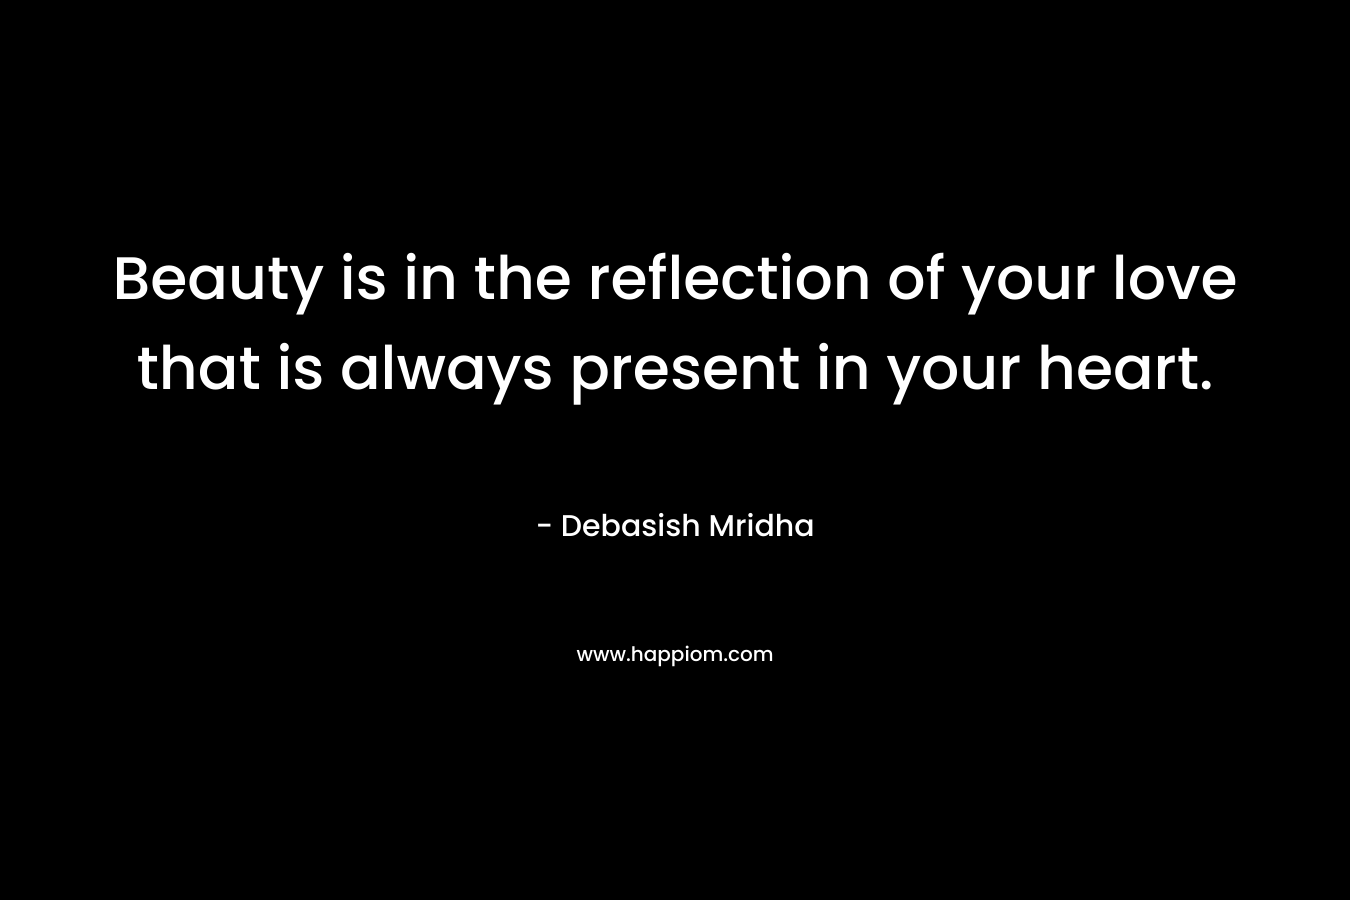 Beauty is in the reflection of your love that is always present in your heart.